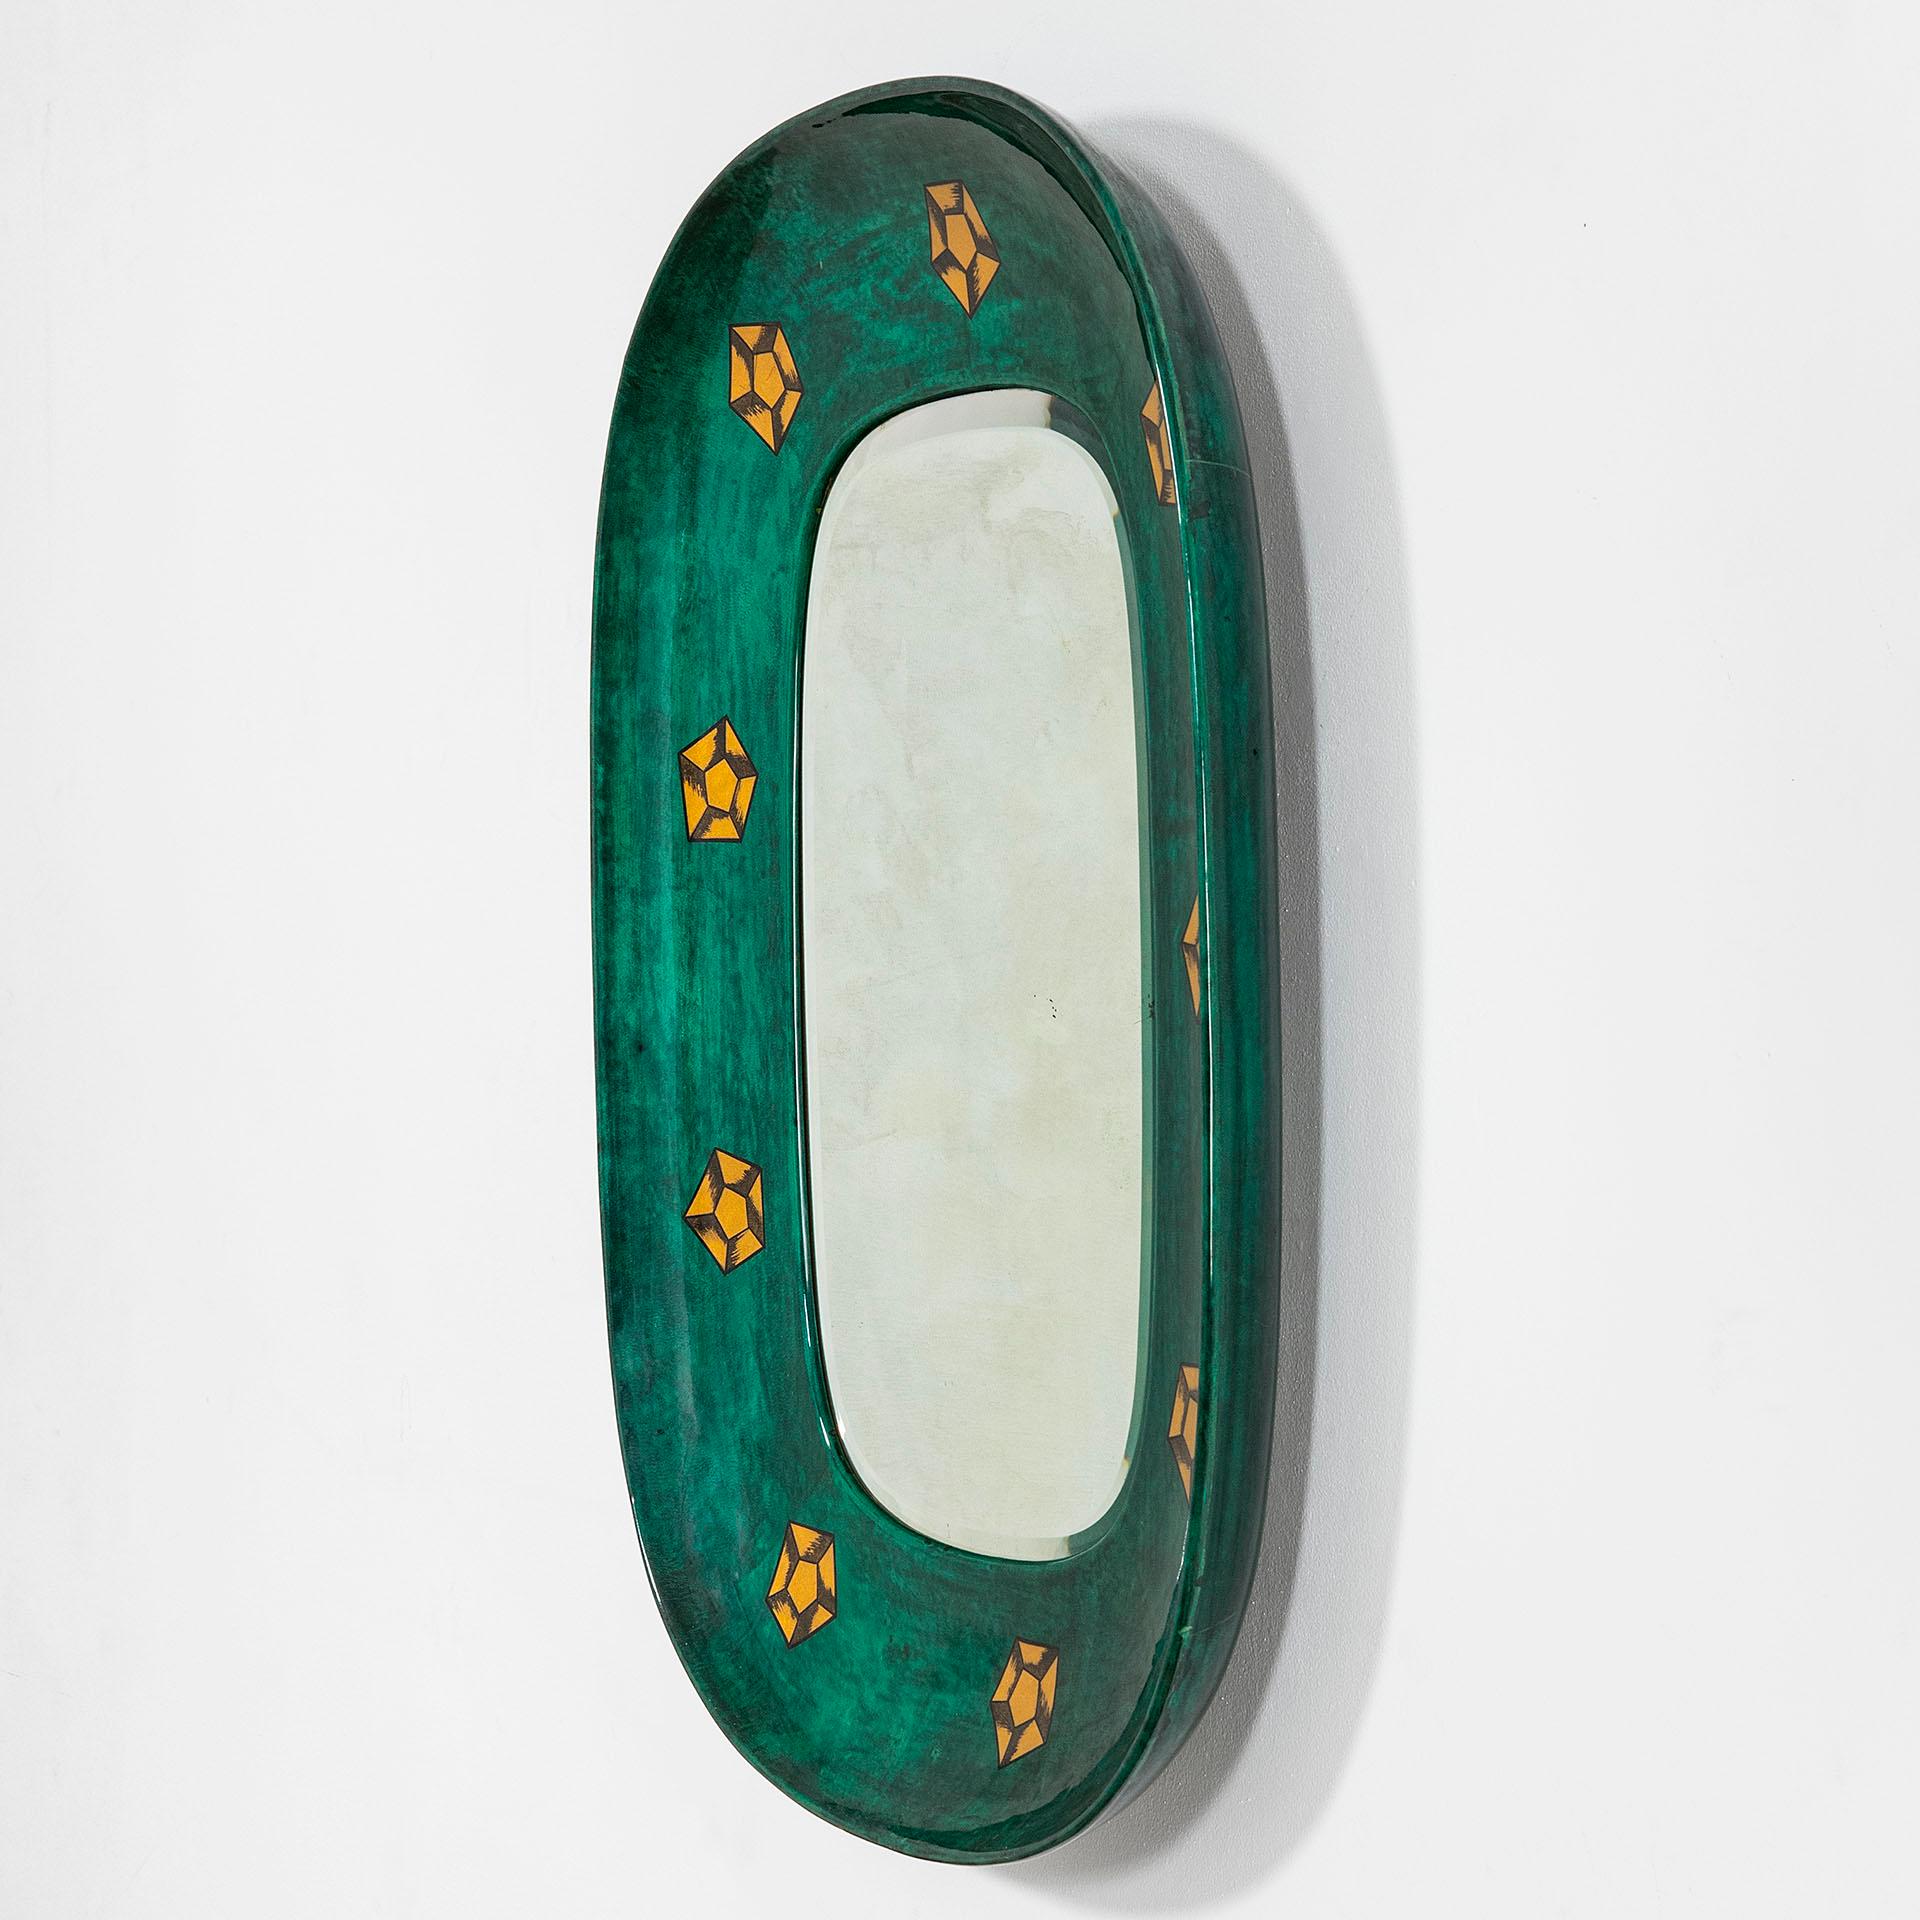 Italian 20th Century Aldo Tura Wall Mirror with Resin Coat, Wood and Paper Motifs, 1950s For Sale